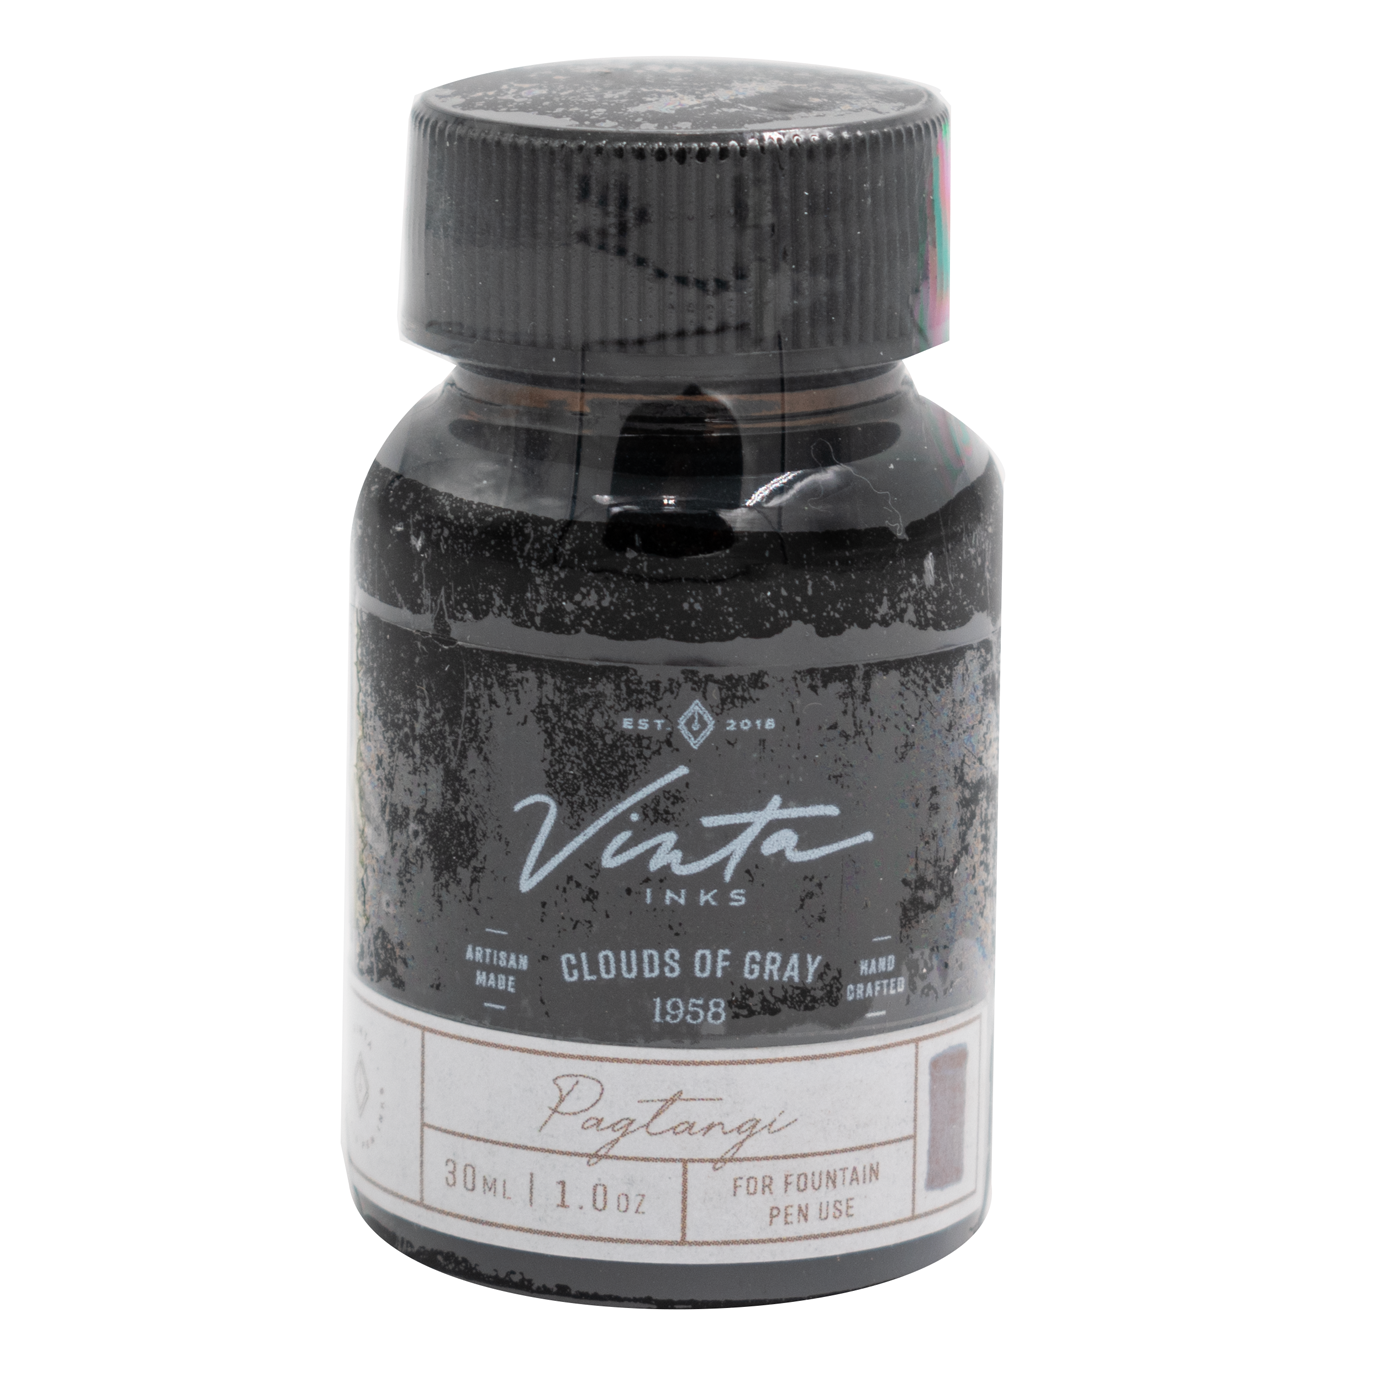 Vinta Inks - Fairytale Collection - Clouds of Gray- Pagtangi 1958